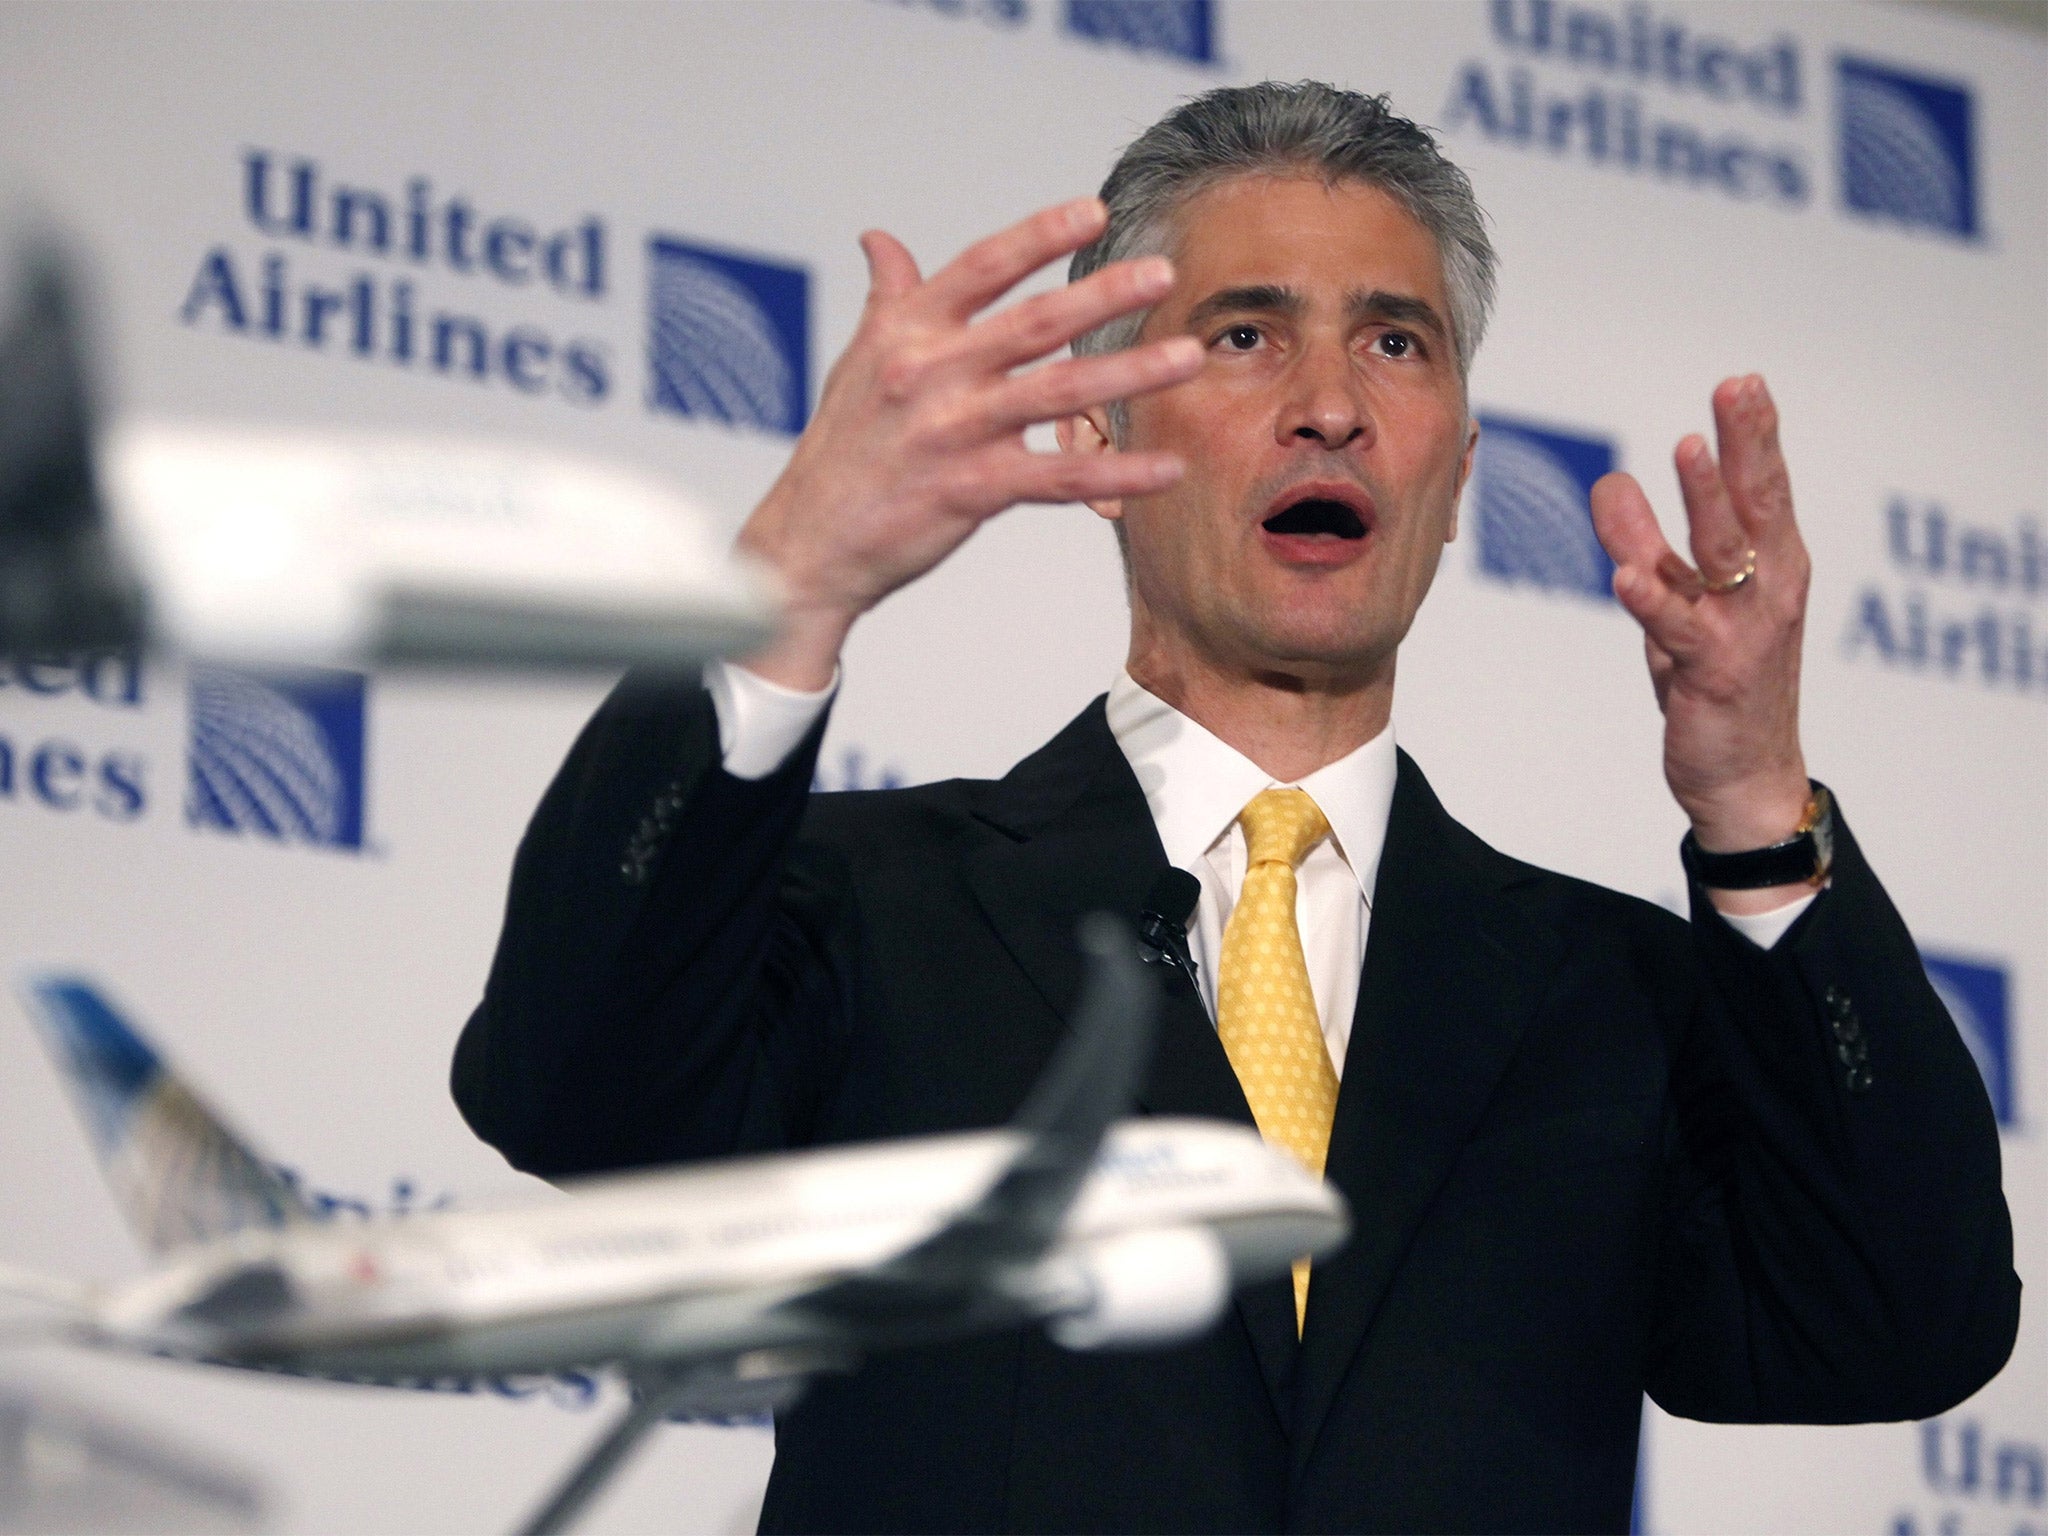 Jeff Smisek, former chief of United Airlines